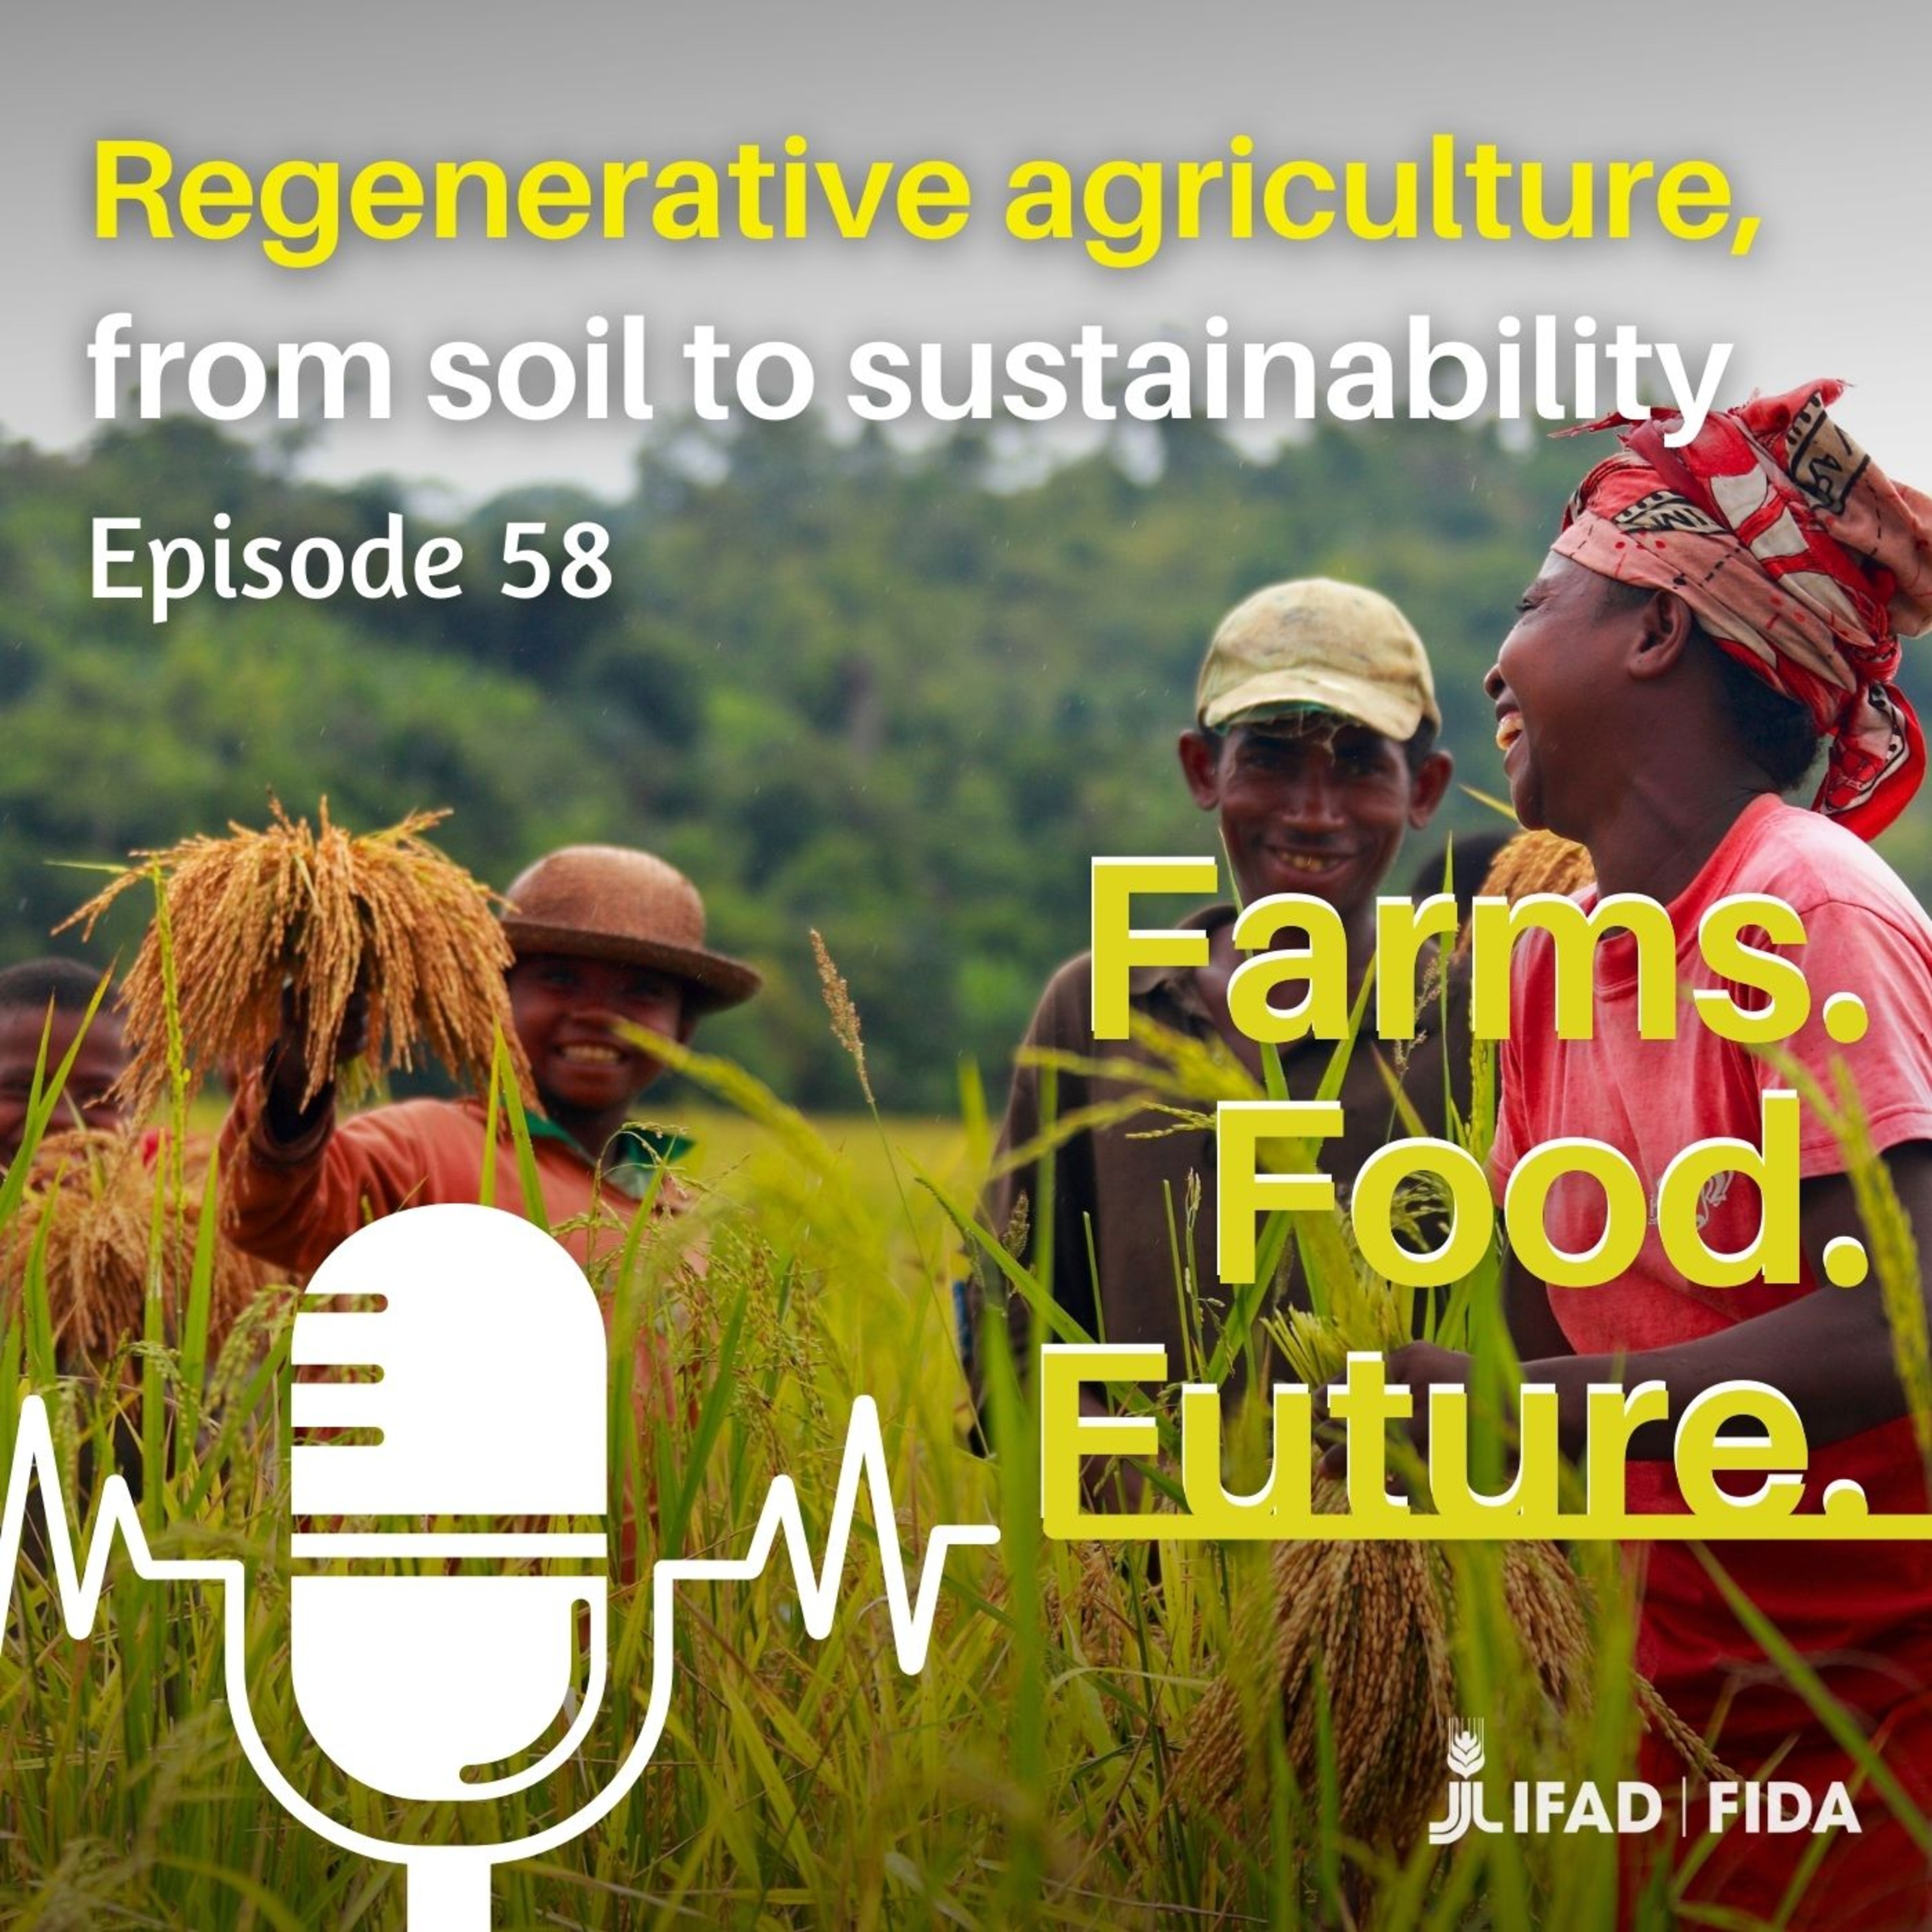 Regenerative agriculture, from soil to sustainability